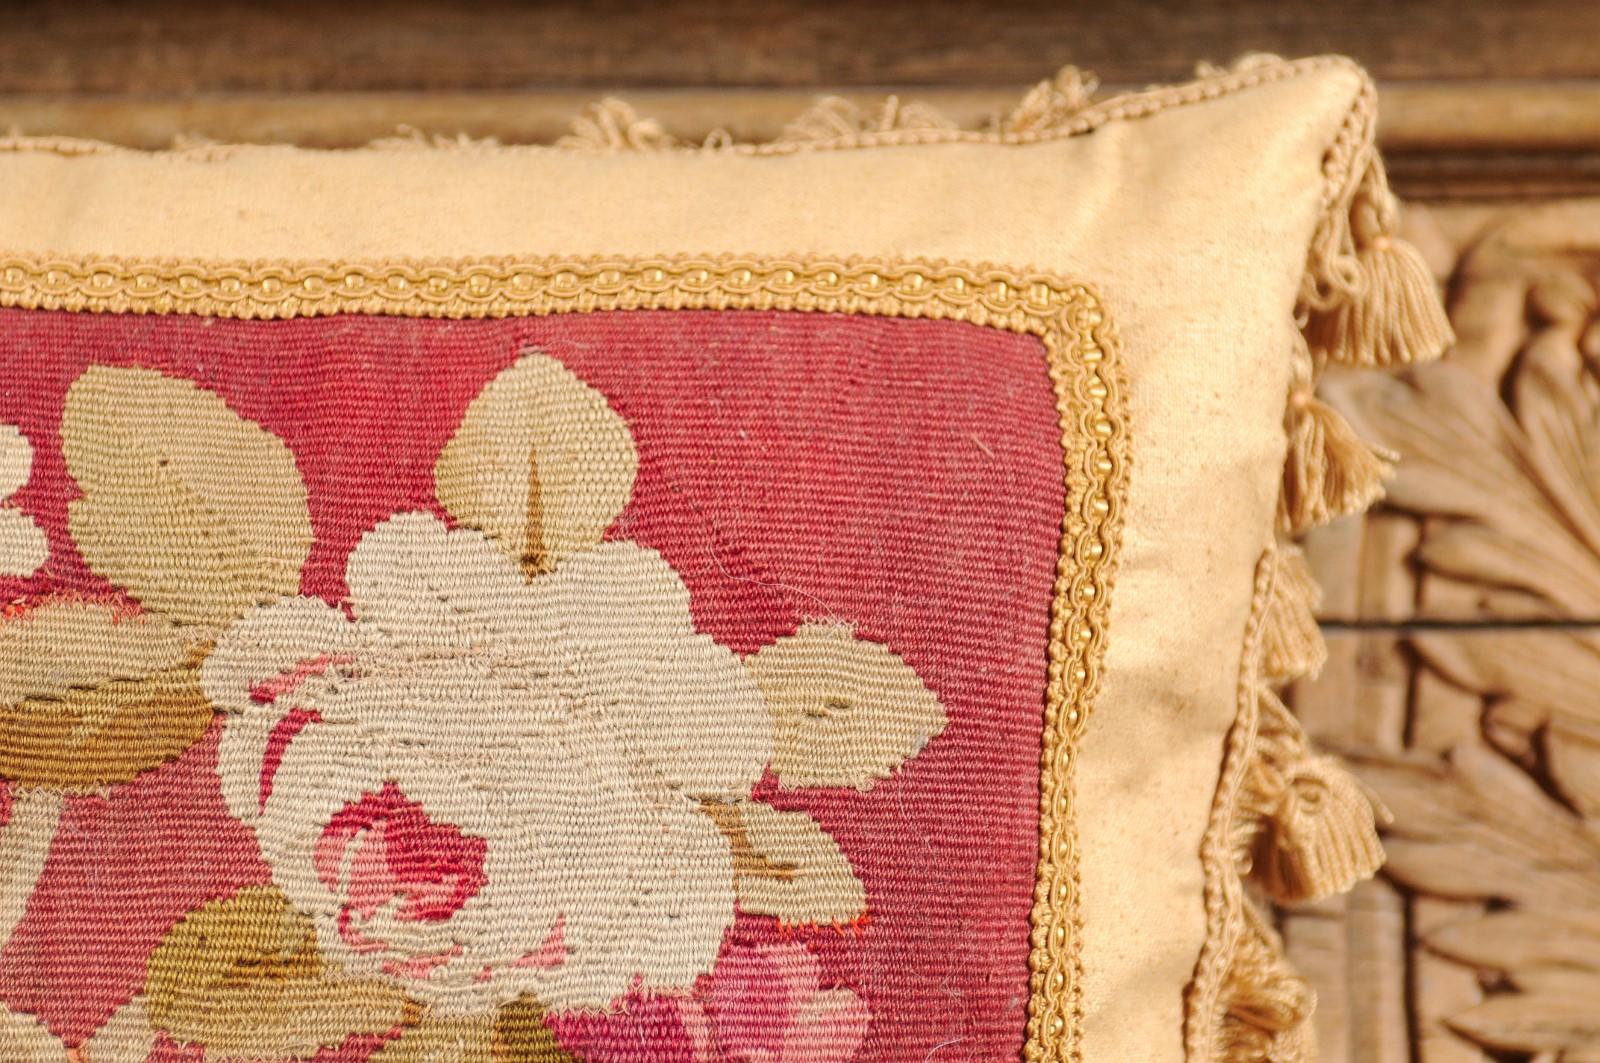 French 19th Century Aubusson Tapestry Pillow with Floral Decor and Tassels For Sale 10